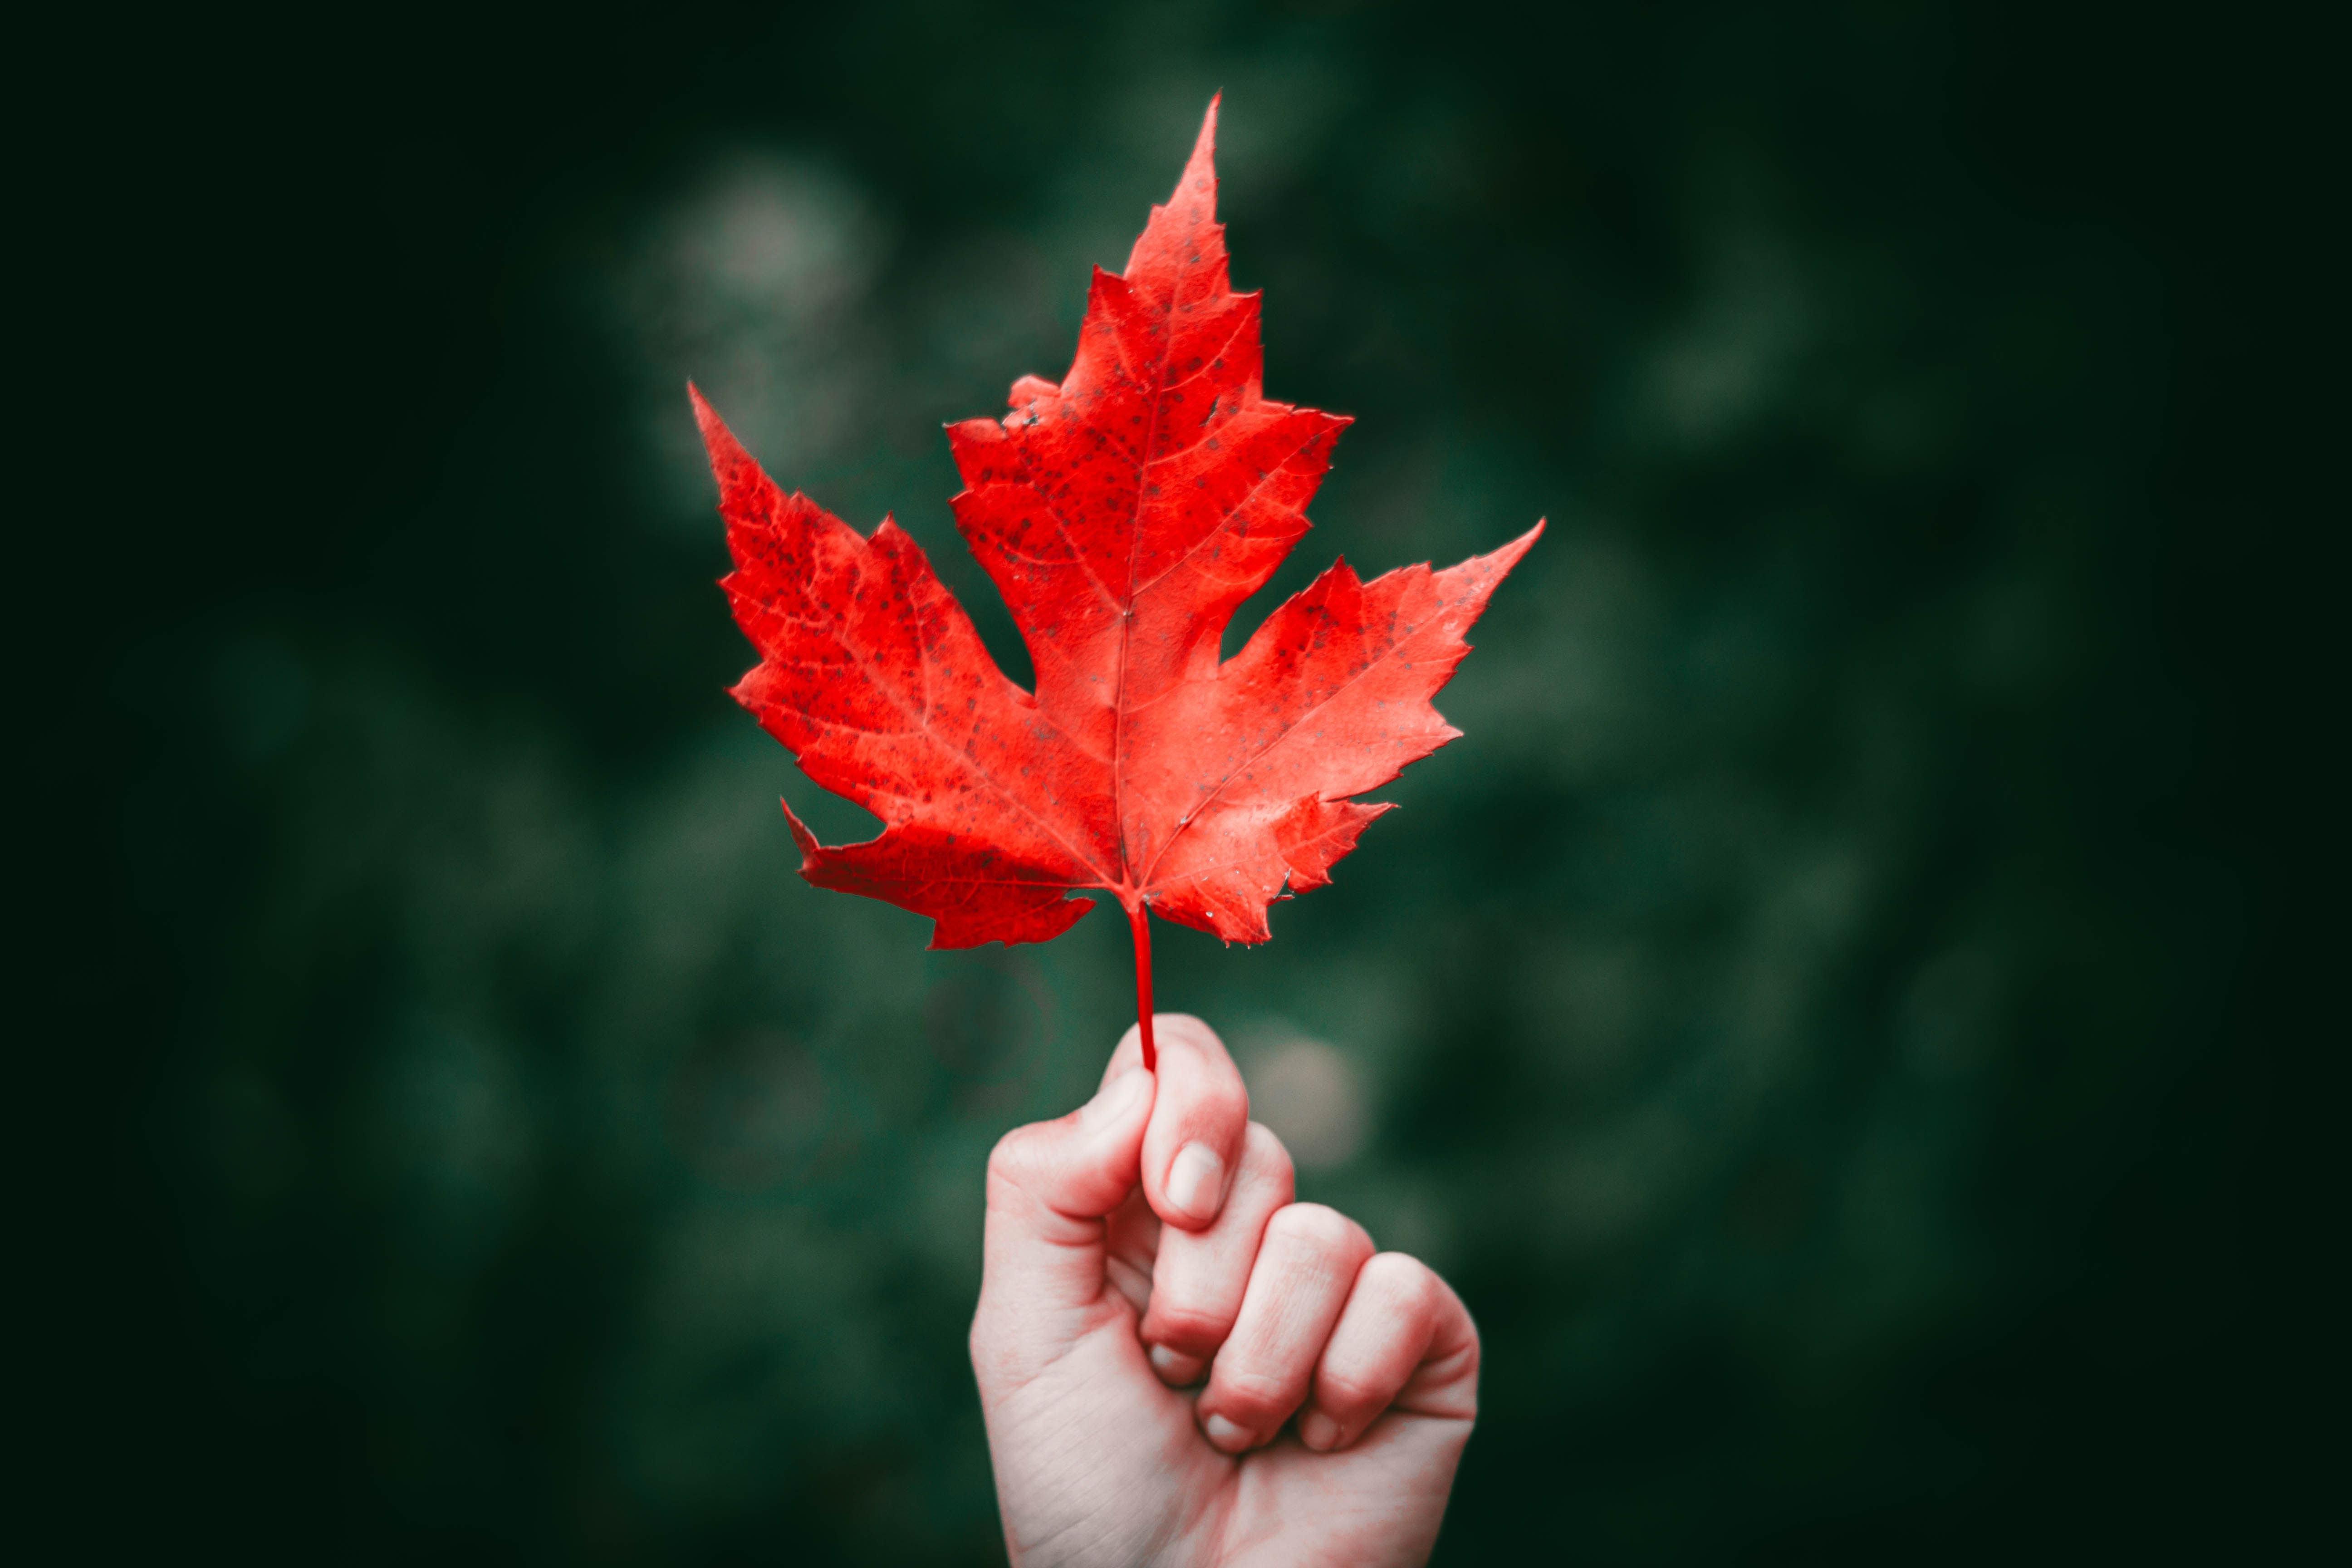 Hand holding a red maple leaf